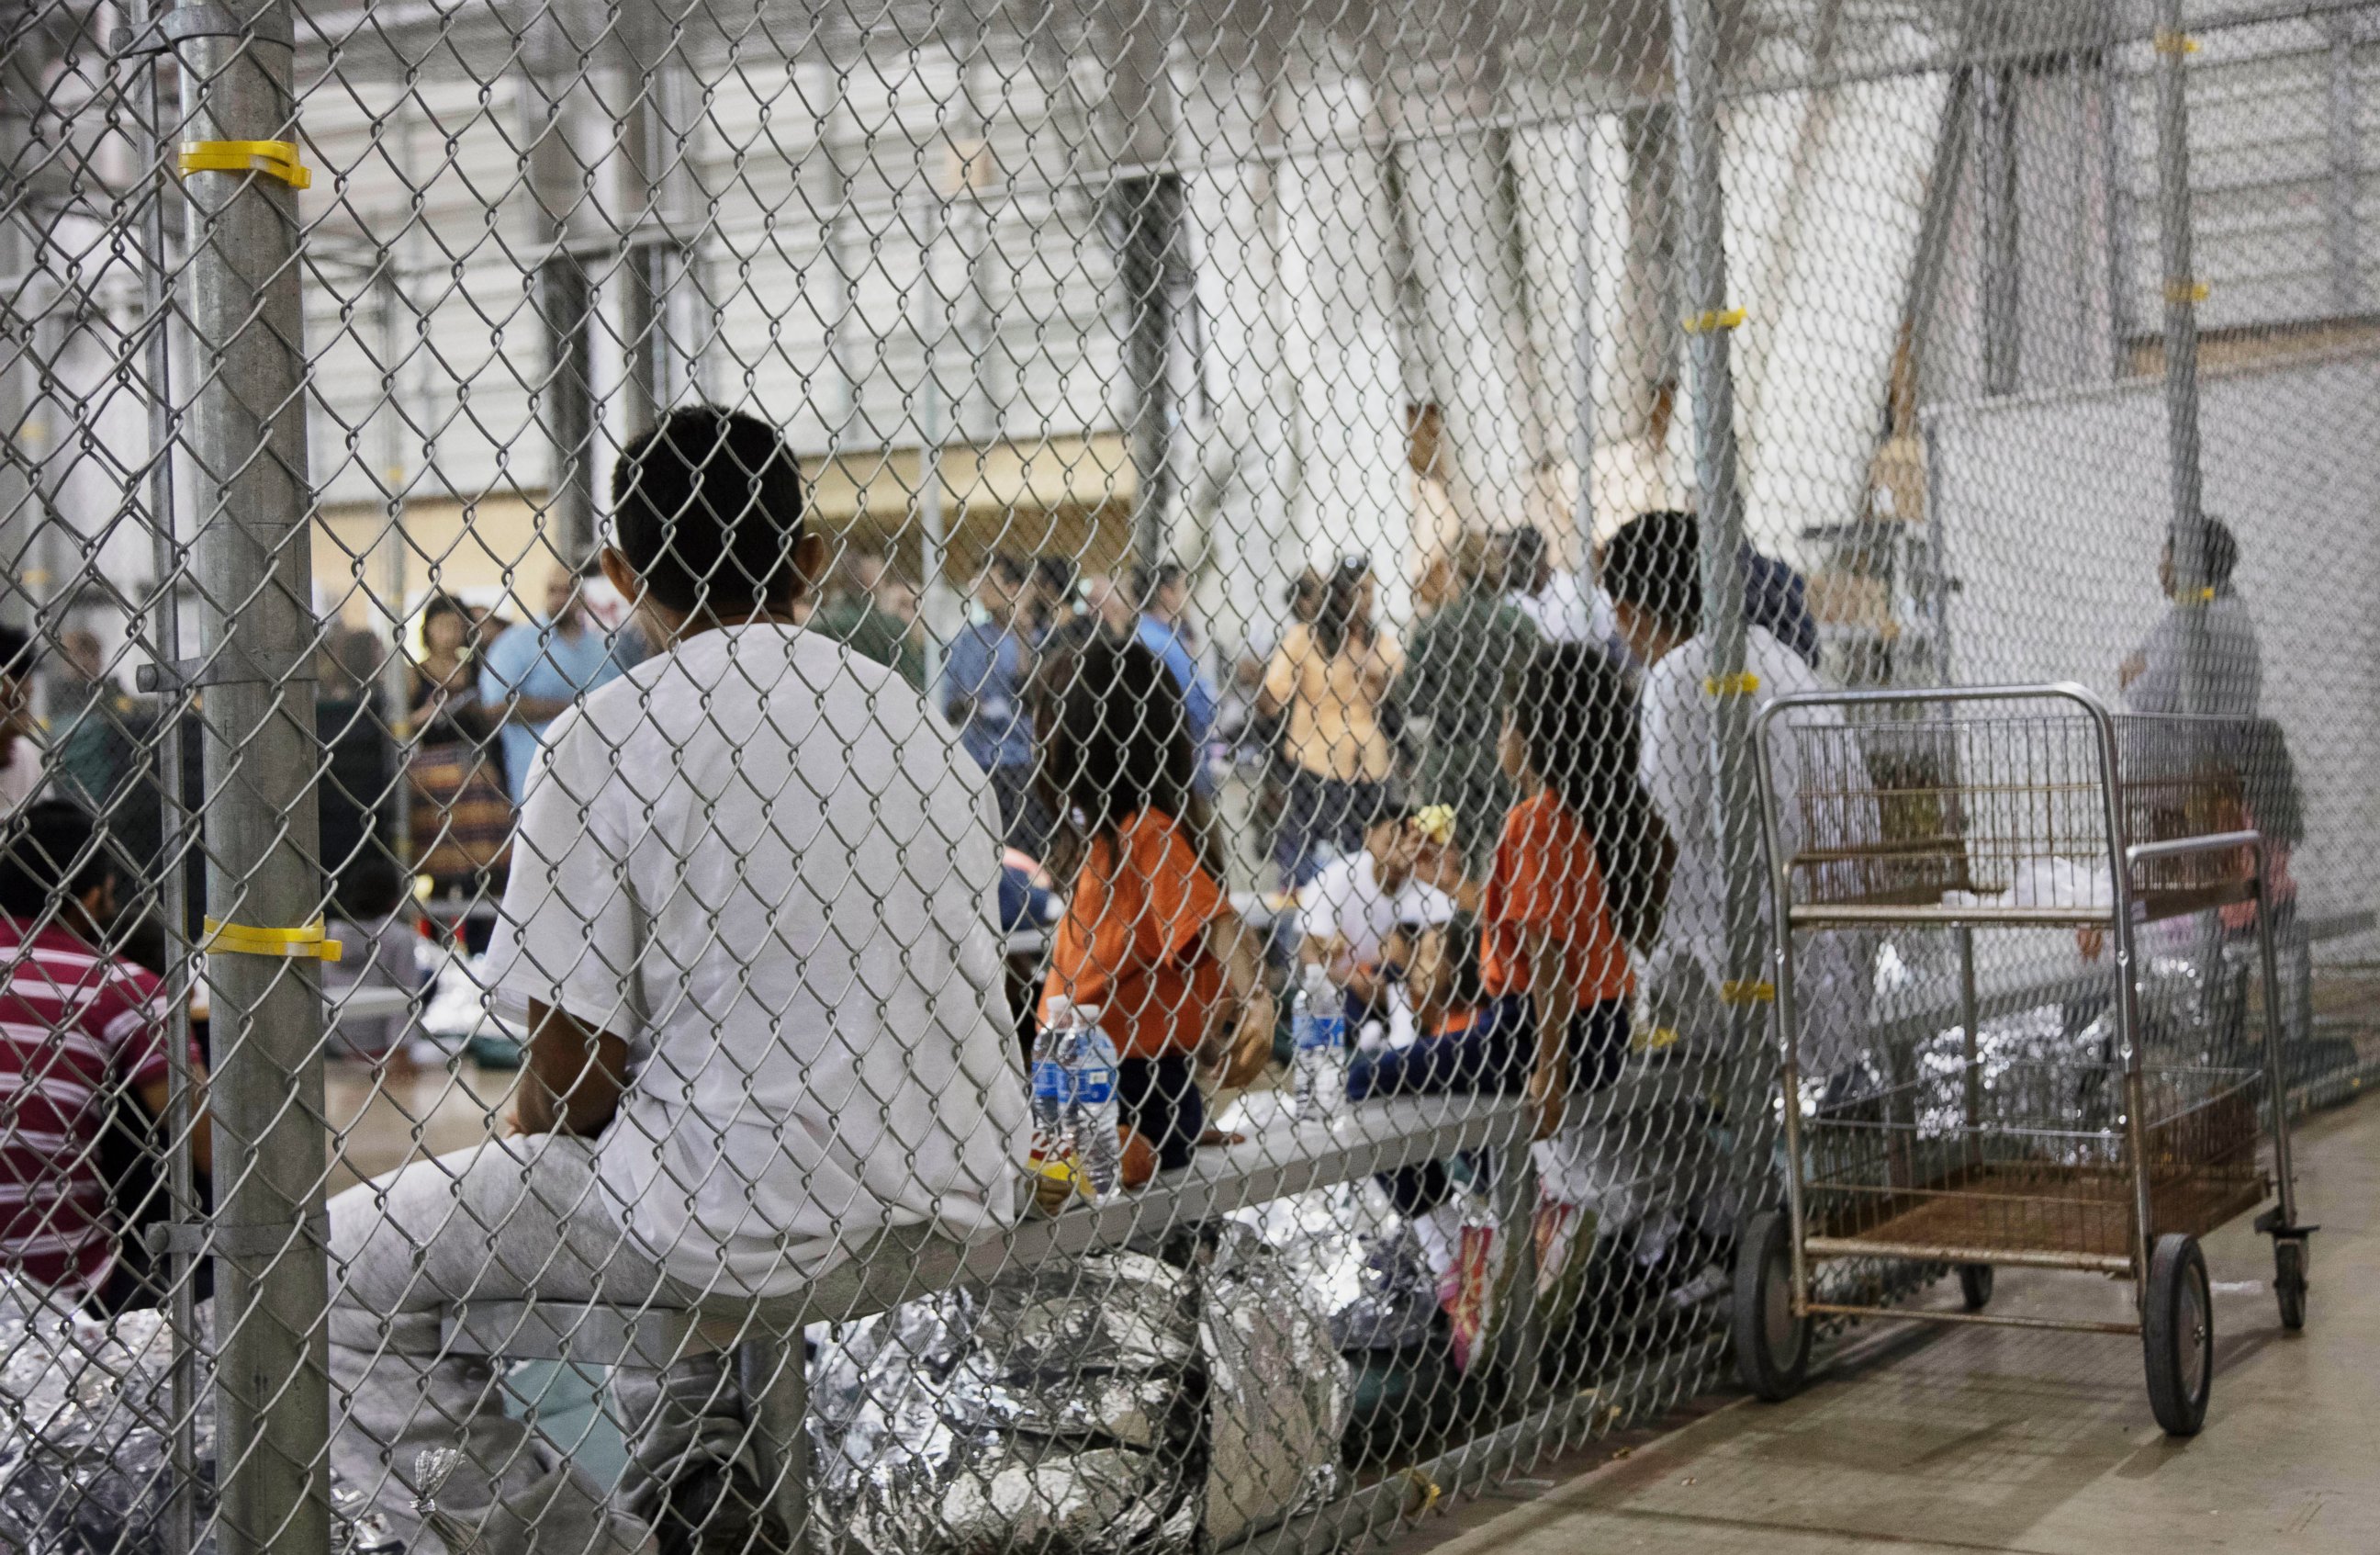 PHOTO: In this June 17, 2018, file photo, provided by U.S. Customs and Border Protection, people who have been taken into custody related to cases of illegal entry into the United States, sit in one of the cages at a facility in McAllen, Texas.